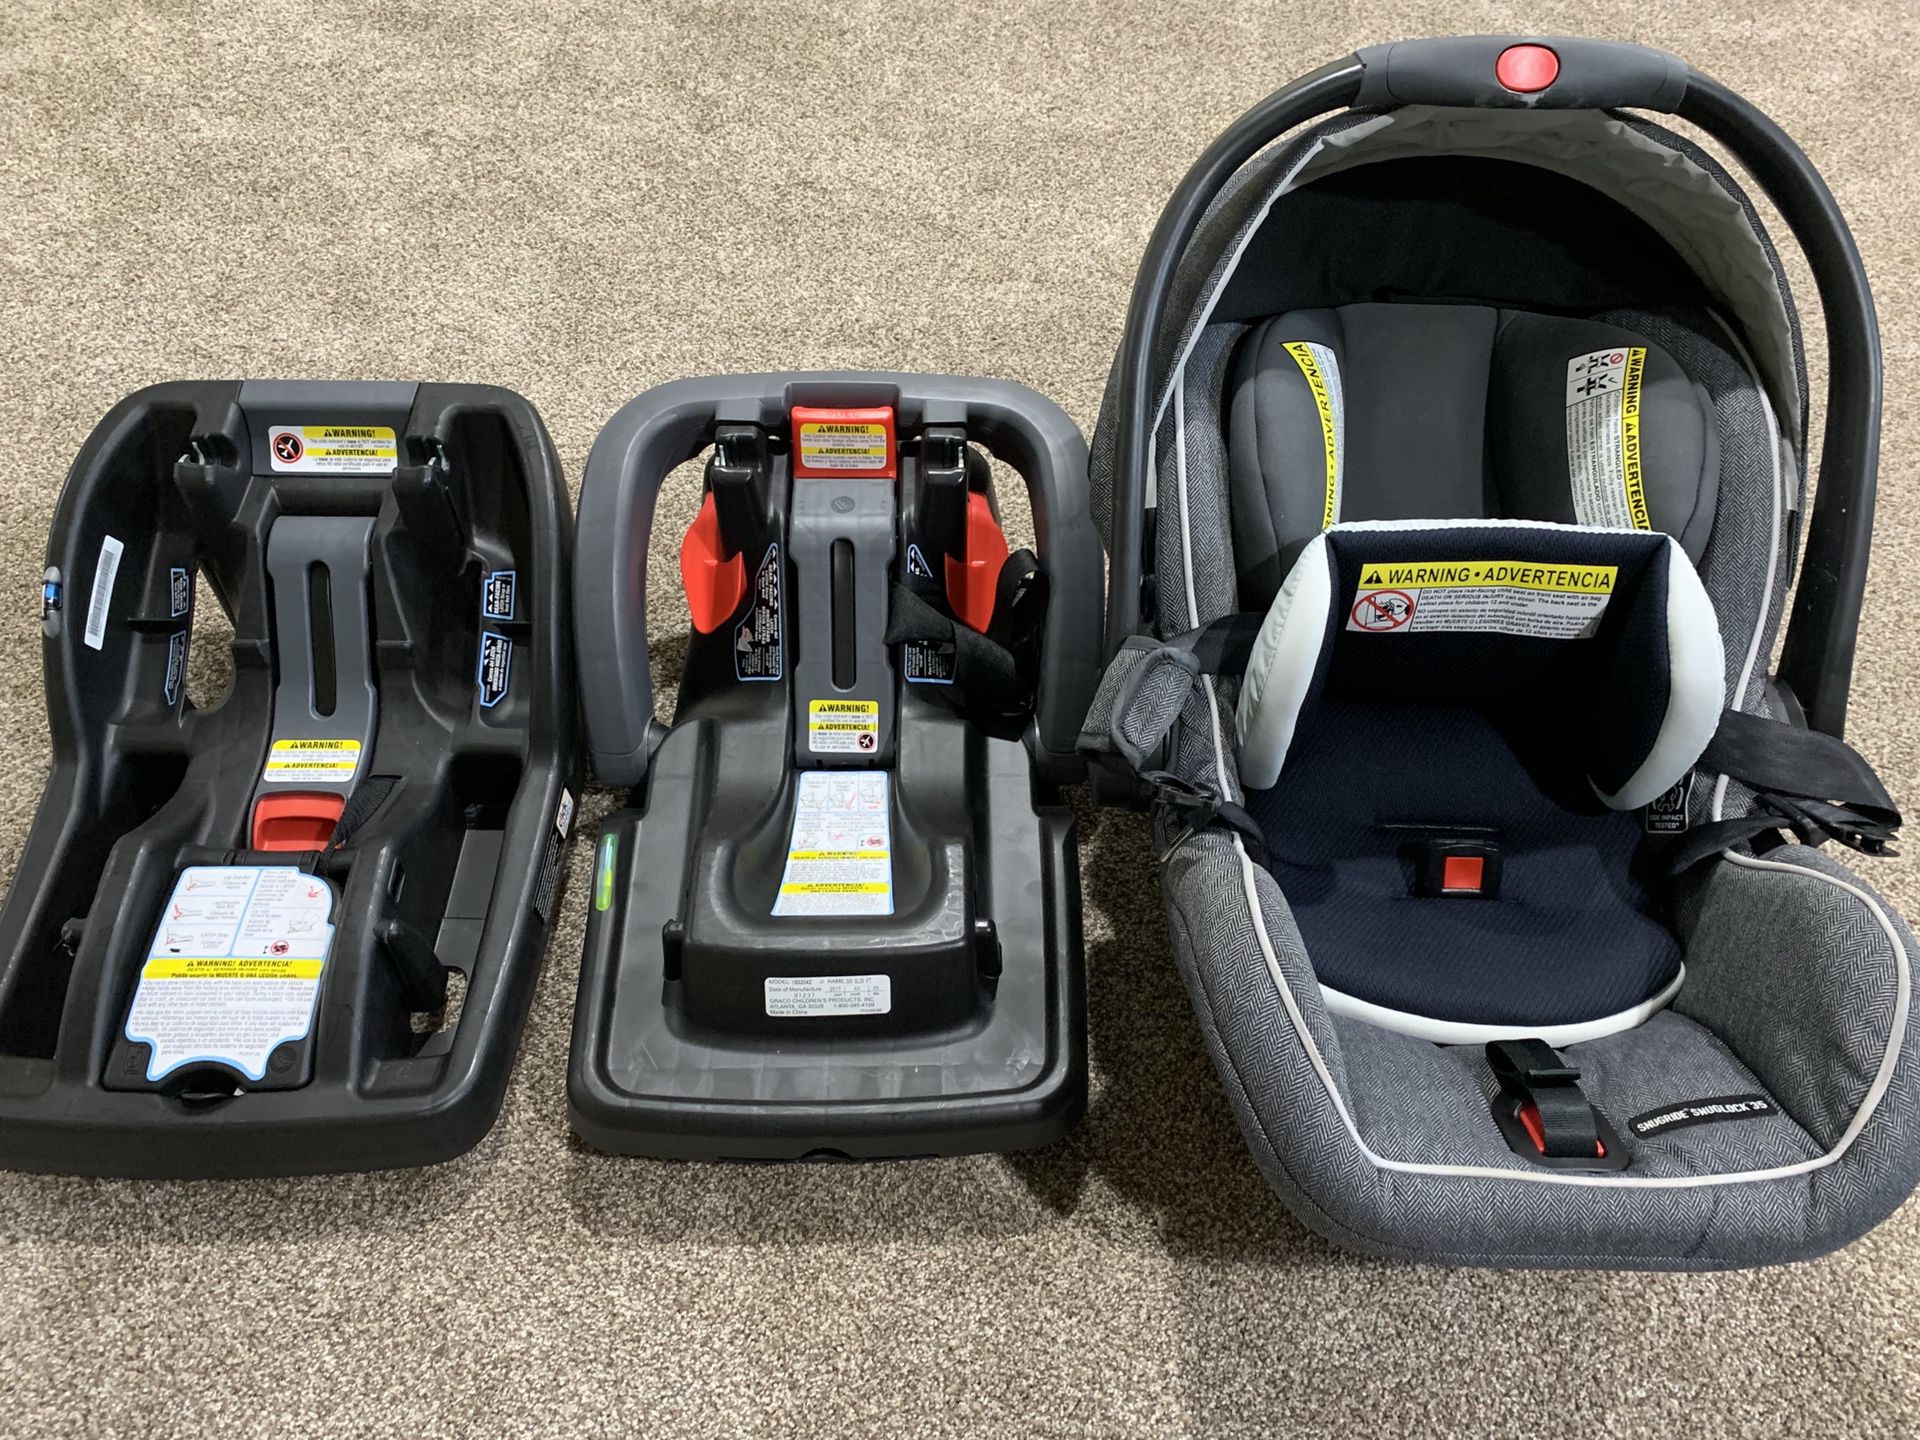 Graco car seat, two connectors, infant insert